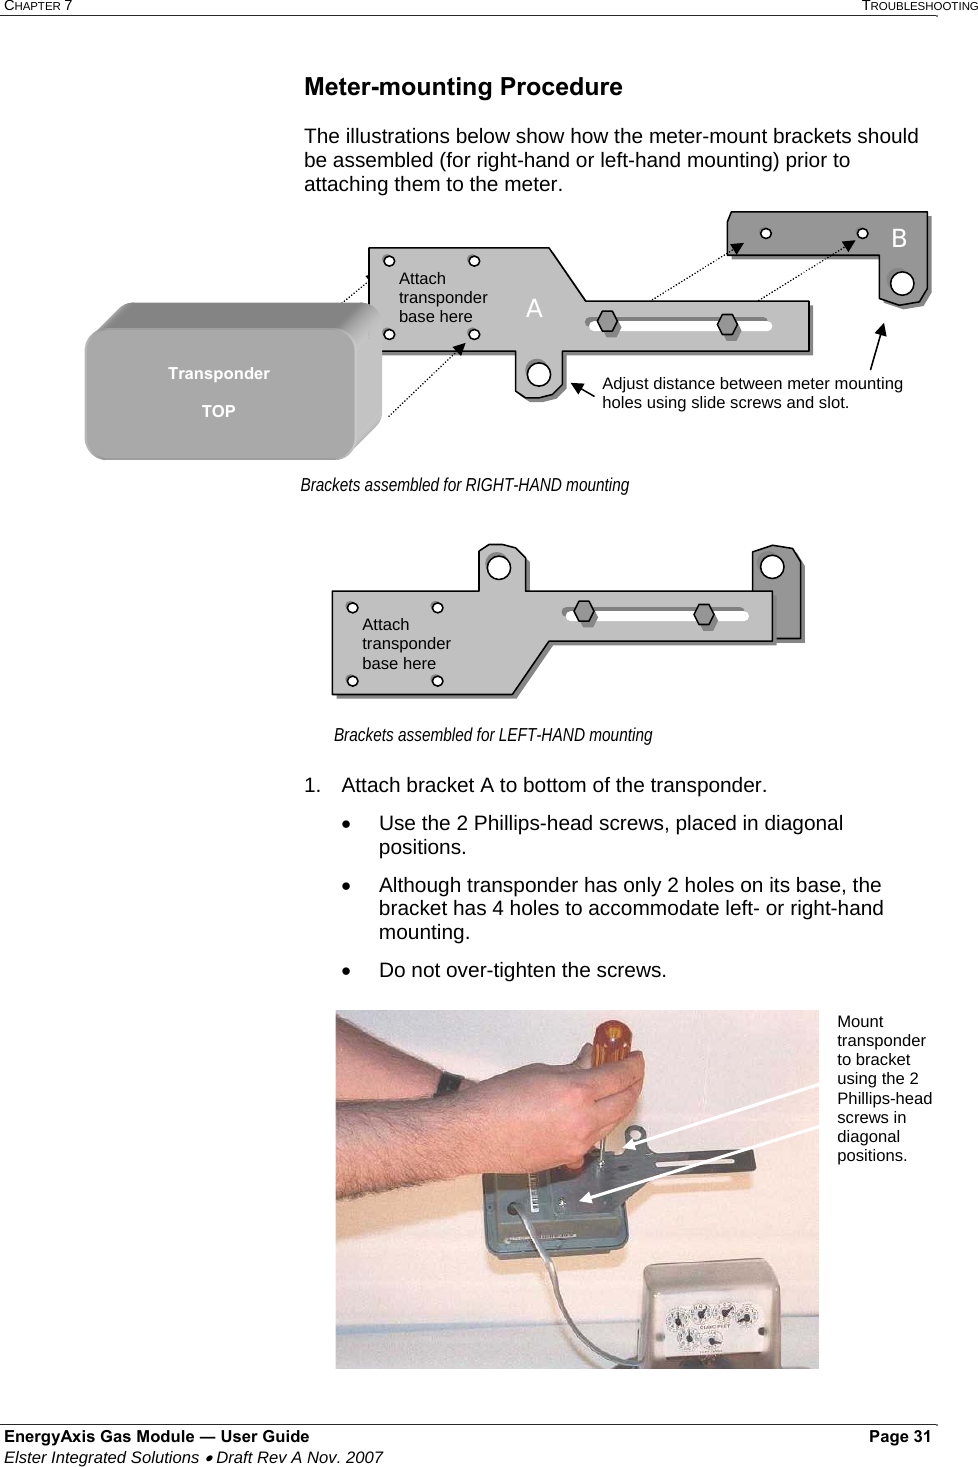 CHAPTER 7   TROUBLESHOOTING EnergyAxis Gas Module ― User Guide   Page 31  Elster Integrated Solutions • Draft Rev A Nov. 2007  Meter-mounting Procedure  The illustrations below show how the meter-mount brackets should be assembled (for right-hand or left-hand mounting) prior to attaching them to the meter.  1.  Attach bracket A to bottom of the transponder. •  Use the 2 Phillips-head screws, placed in diagonal positions.  •  Although transponder has only 2 holes on its base, the bracket has 4 holes to accommodate left- or right-hand mounting. •  Do not over-tighten the screws.   Attach transponder base here Brackets assembled for LEFT-HAND mounting Adjust distance between meter mounting holes using slide screws and slot.B Attach transponder base here Transponder  TOP Brackets assembled for RIGHT-HAND mounting AA  Mount transponder to bracket using the 2 Phillips-head screws in diagonal positions. 